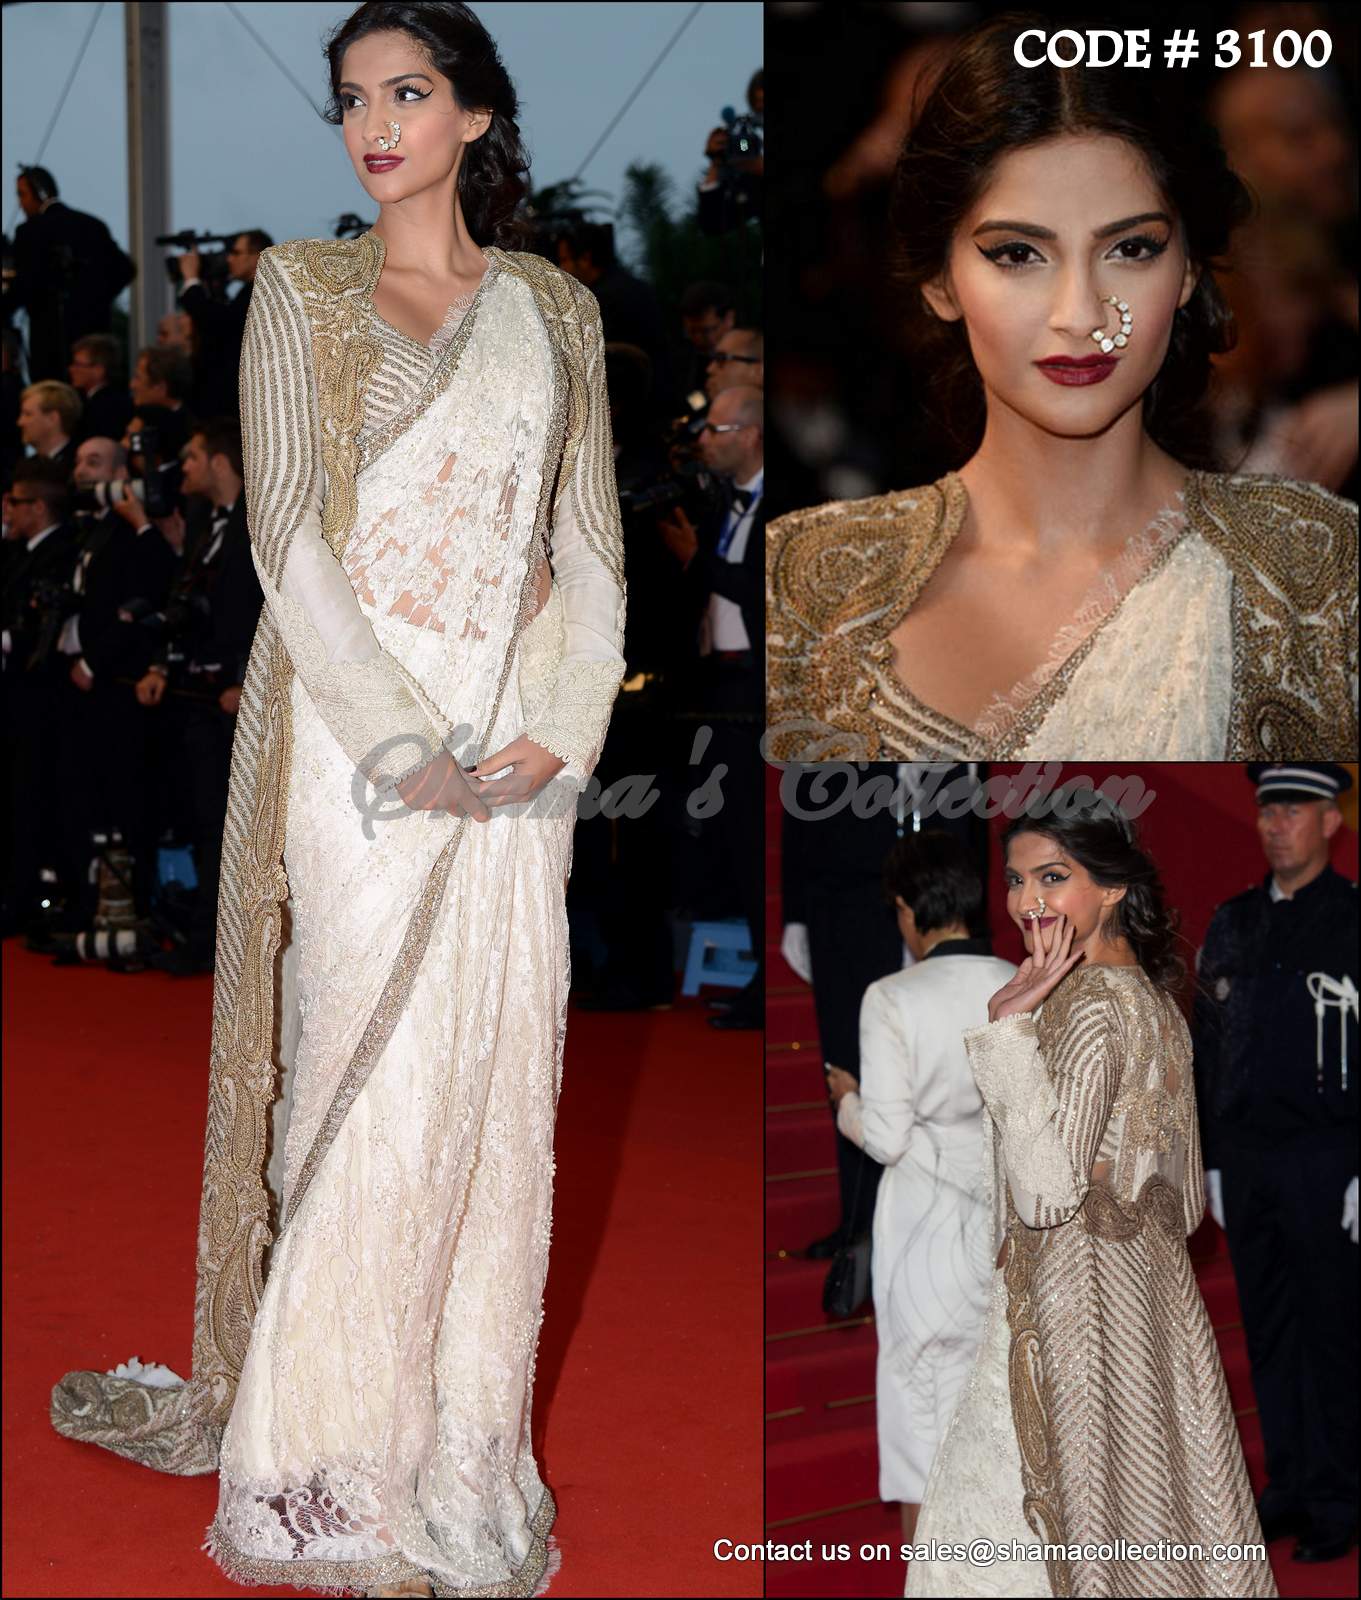 Sonam Kapoor serves chic look in a shimmery gown | TOIPhotogallery